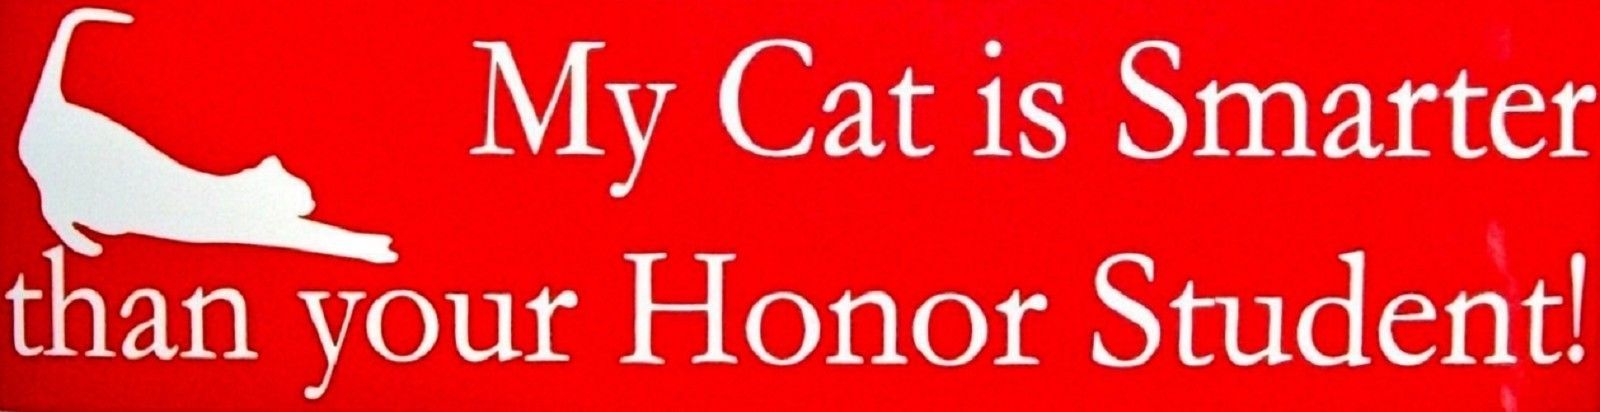 Primary image for My Cat is smarter than your Honor Student Bumper Sticker